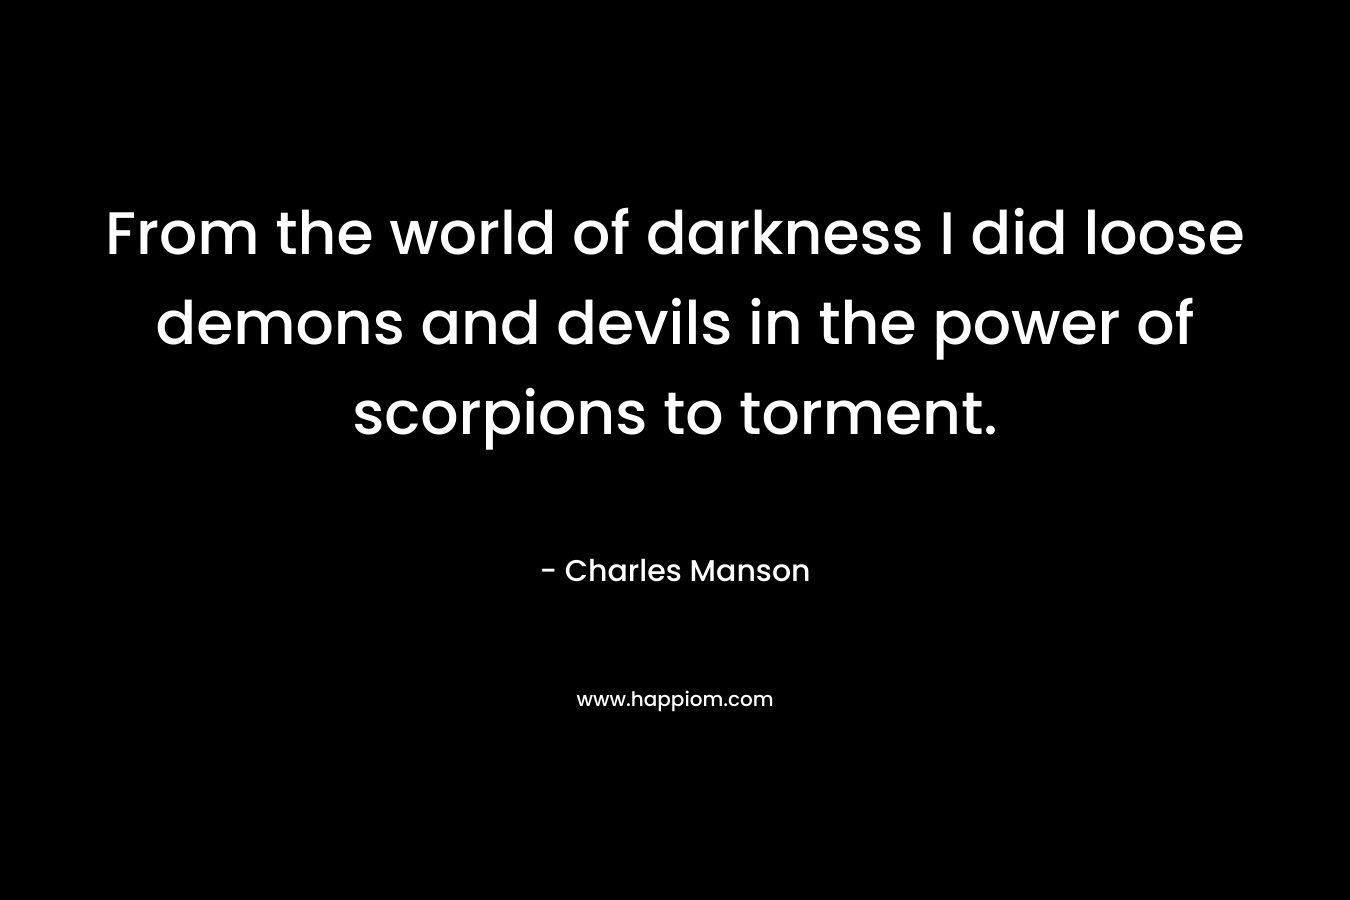 From the world of darkness I did loose demons and devils in the power of scorpions to torment.